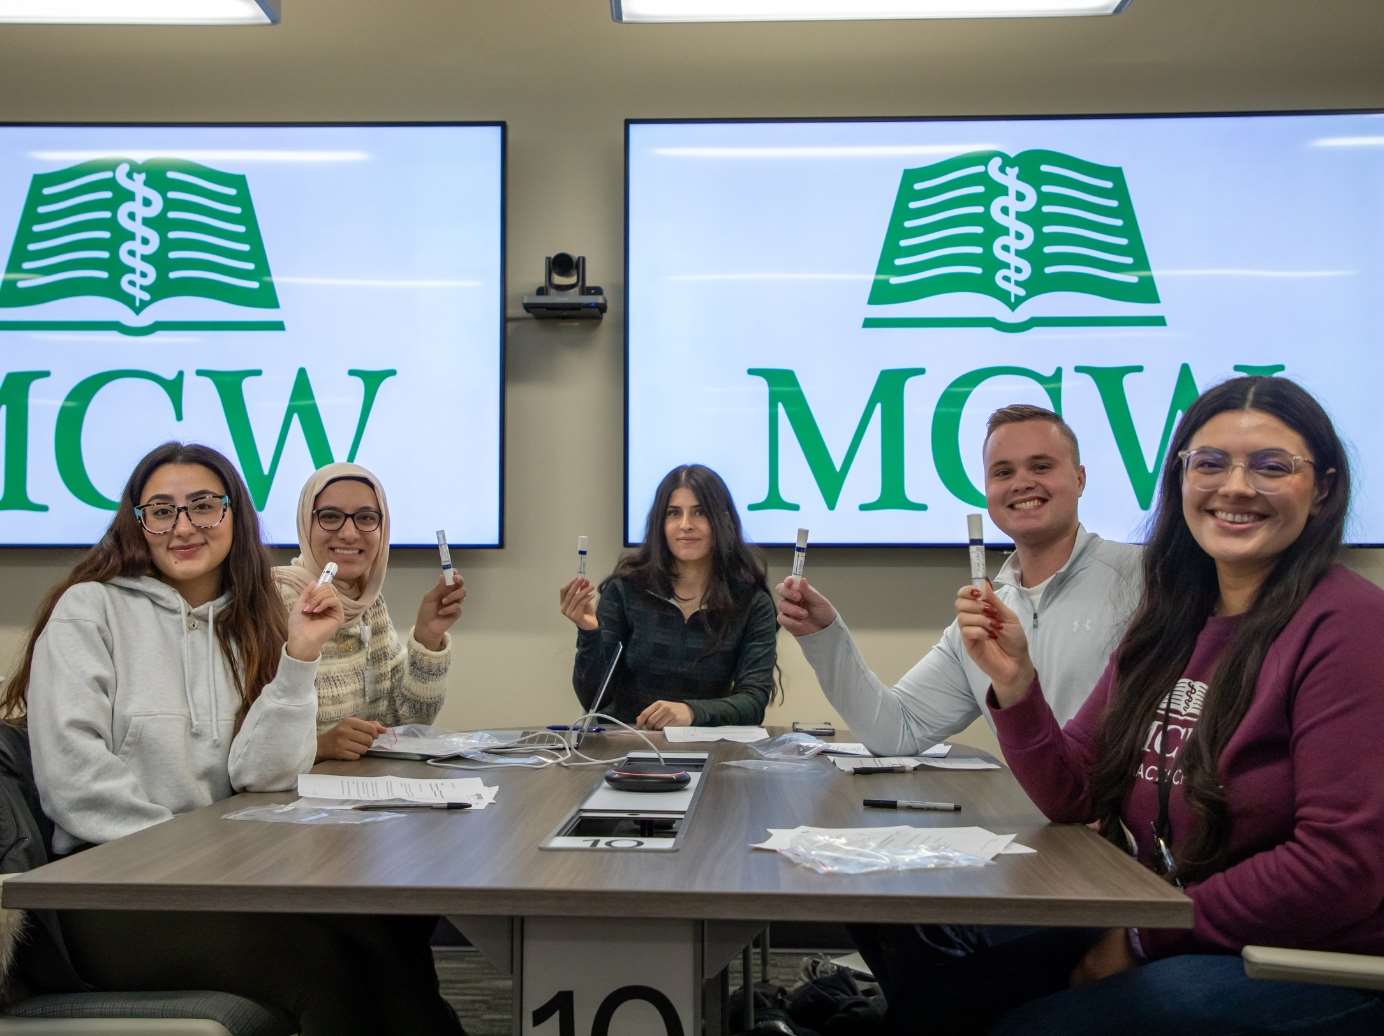 MCW provides rare pharmacogenomics testing opportunity for pharmacy students